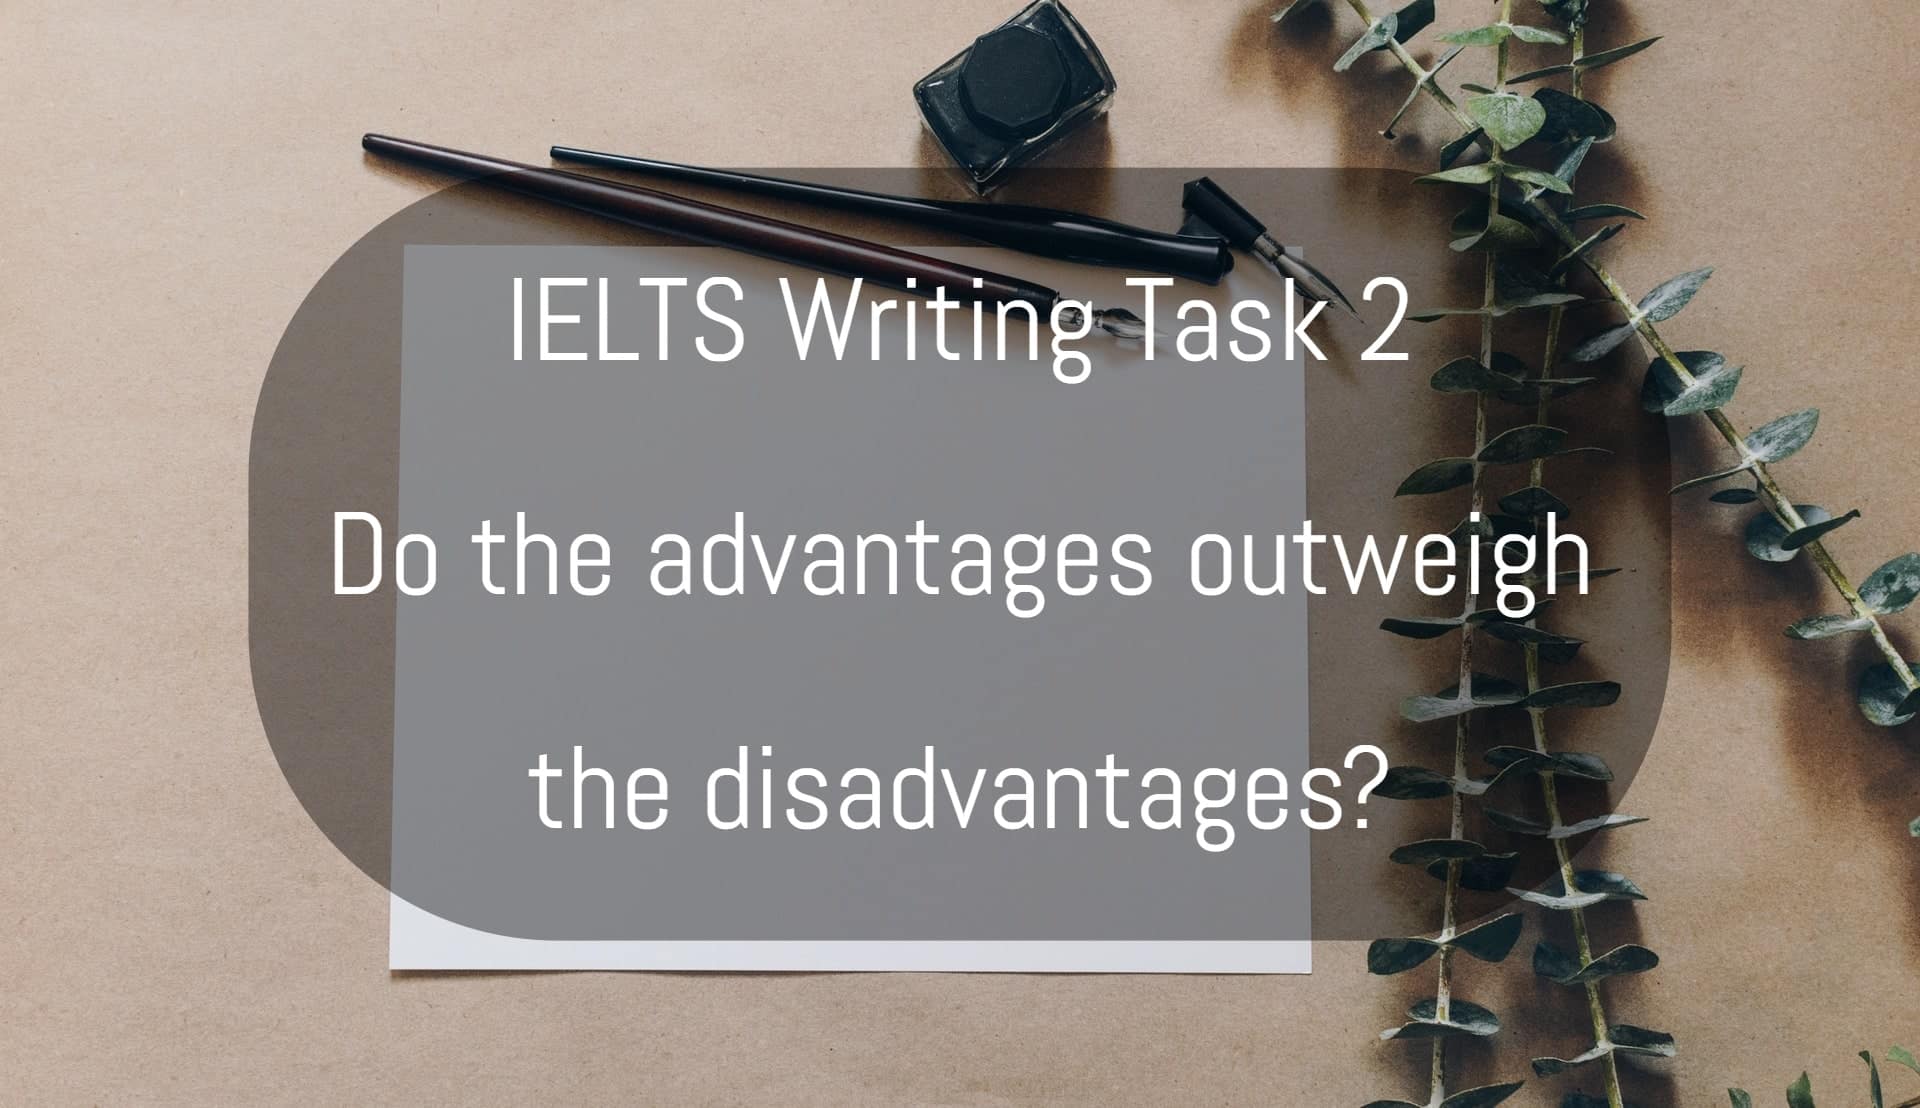 Ielts writing task 2 do the advantages outweigh the disadvantages